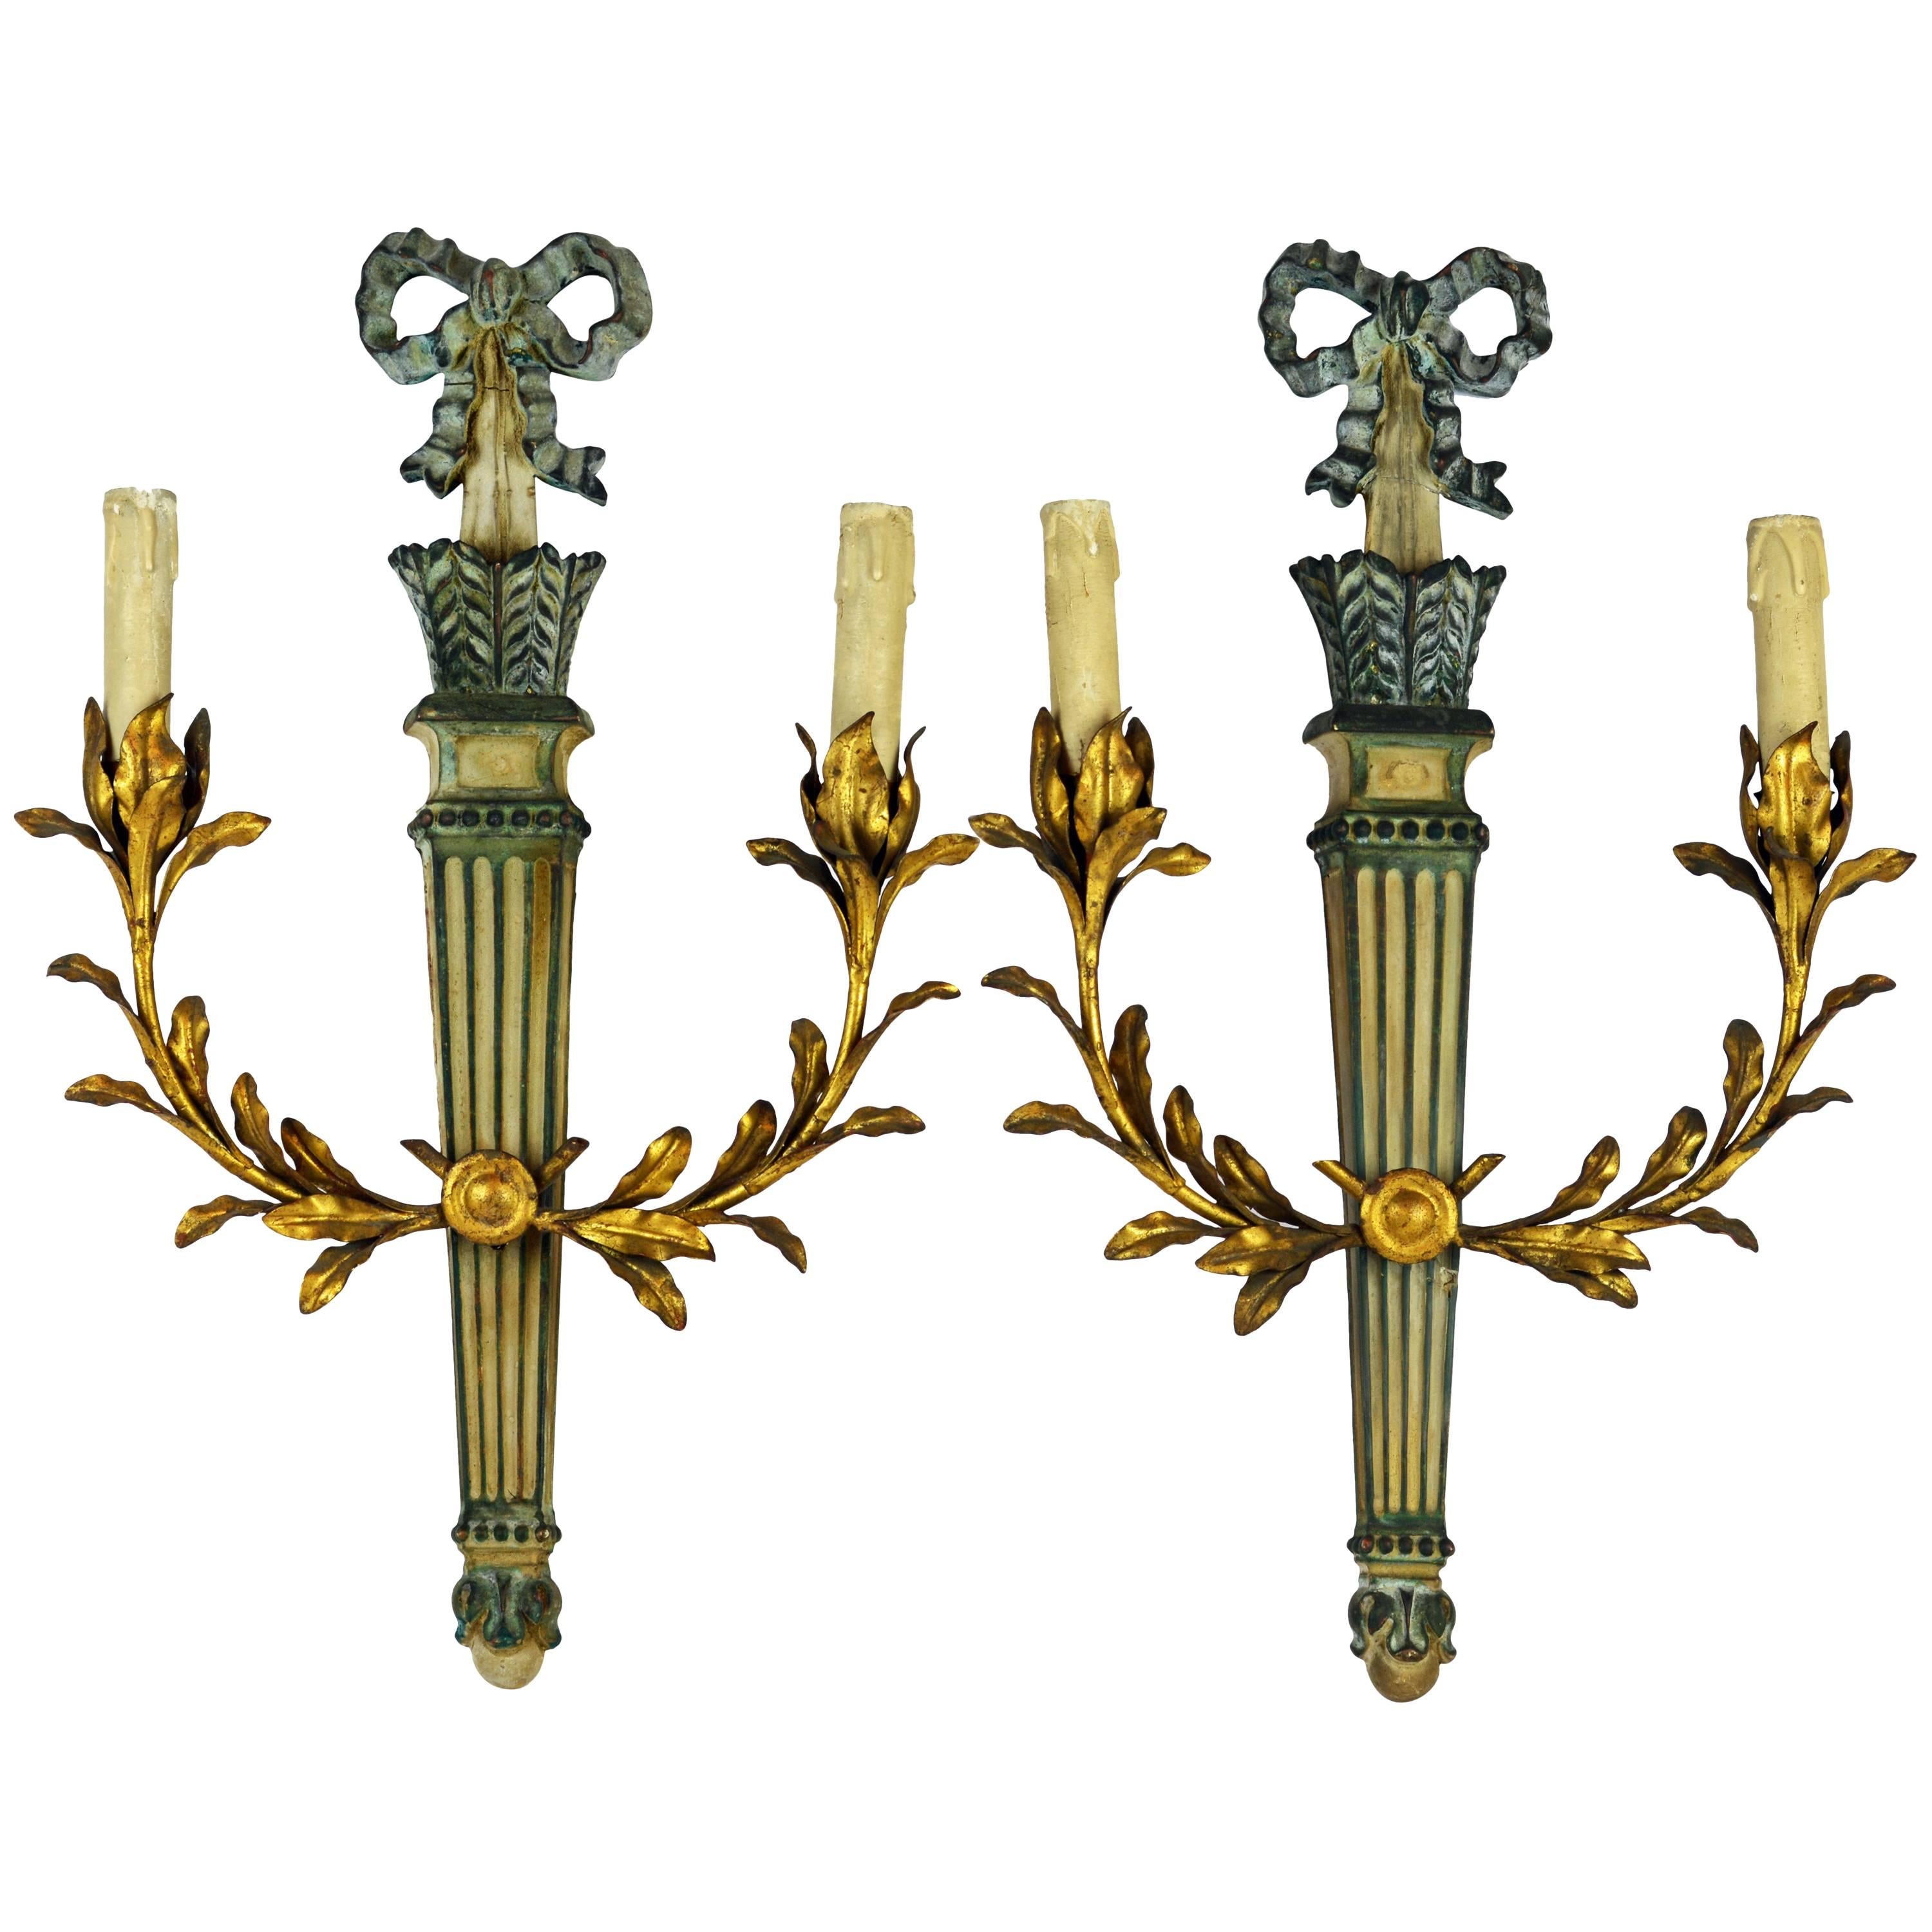 Pair of Midcentury Palladio Neoclassical Style Wood and Gilt Metal Wall Sconces